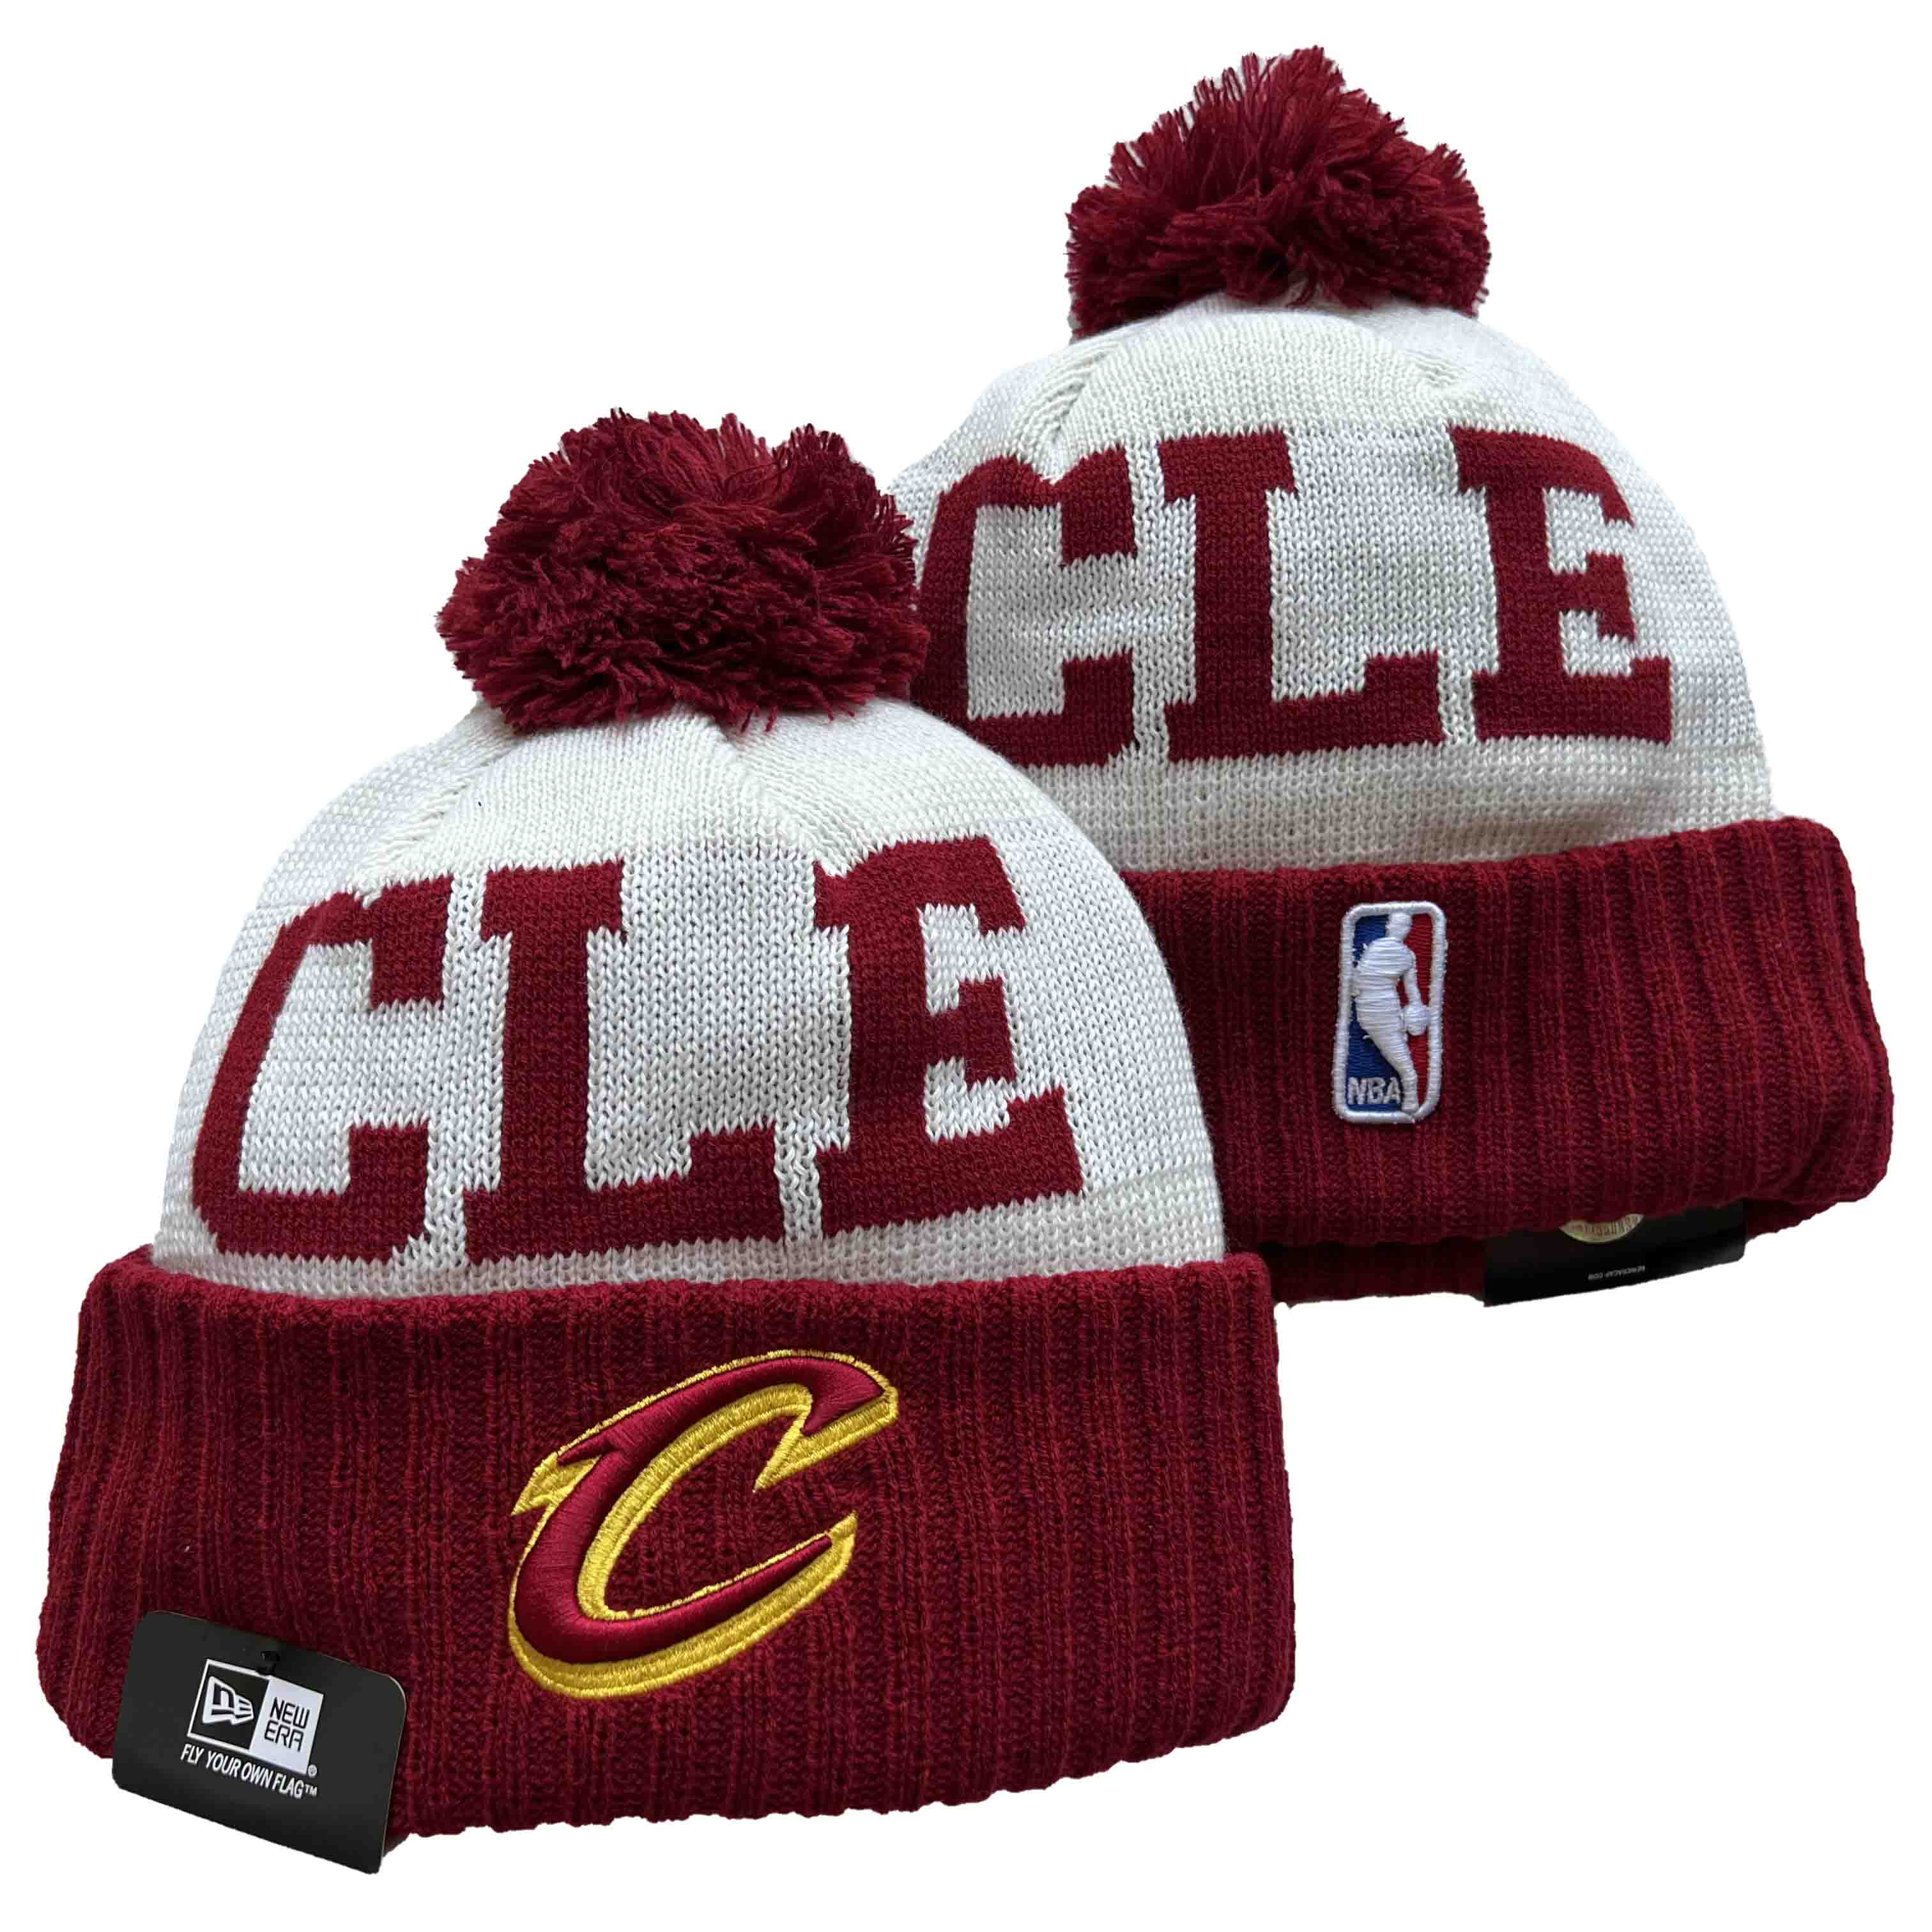 NBA Cleveland Cavaliers Beanies Knit Hats-YD514